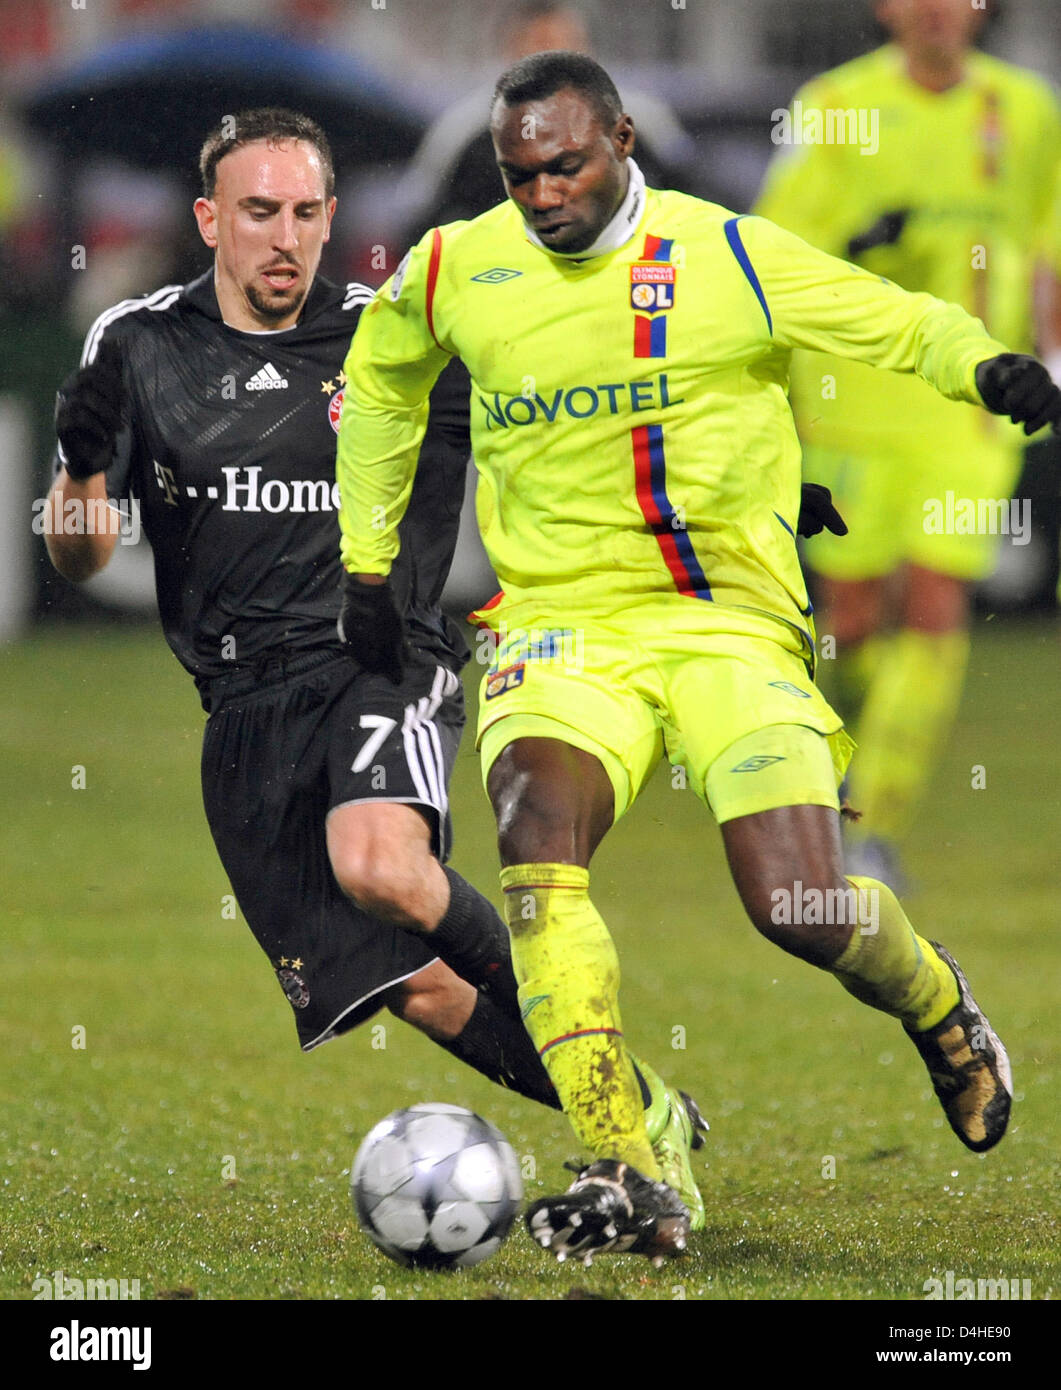 John Mensah (R) of Olympique Lyon vies for the ball with Franck Ribery of FC Bayern Munich during the Champions League Group F match at Stade de Gerland in Lyon, France, 10 December 2008. Bayern Munich defeated Lyon 3-2 securing the first place in UEFA Champions League Group F. Photo: Andreas Gebert Stock Photo